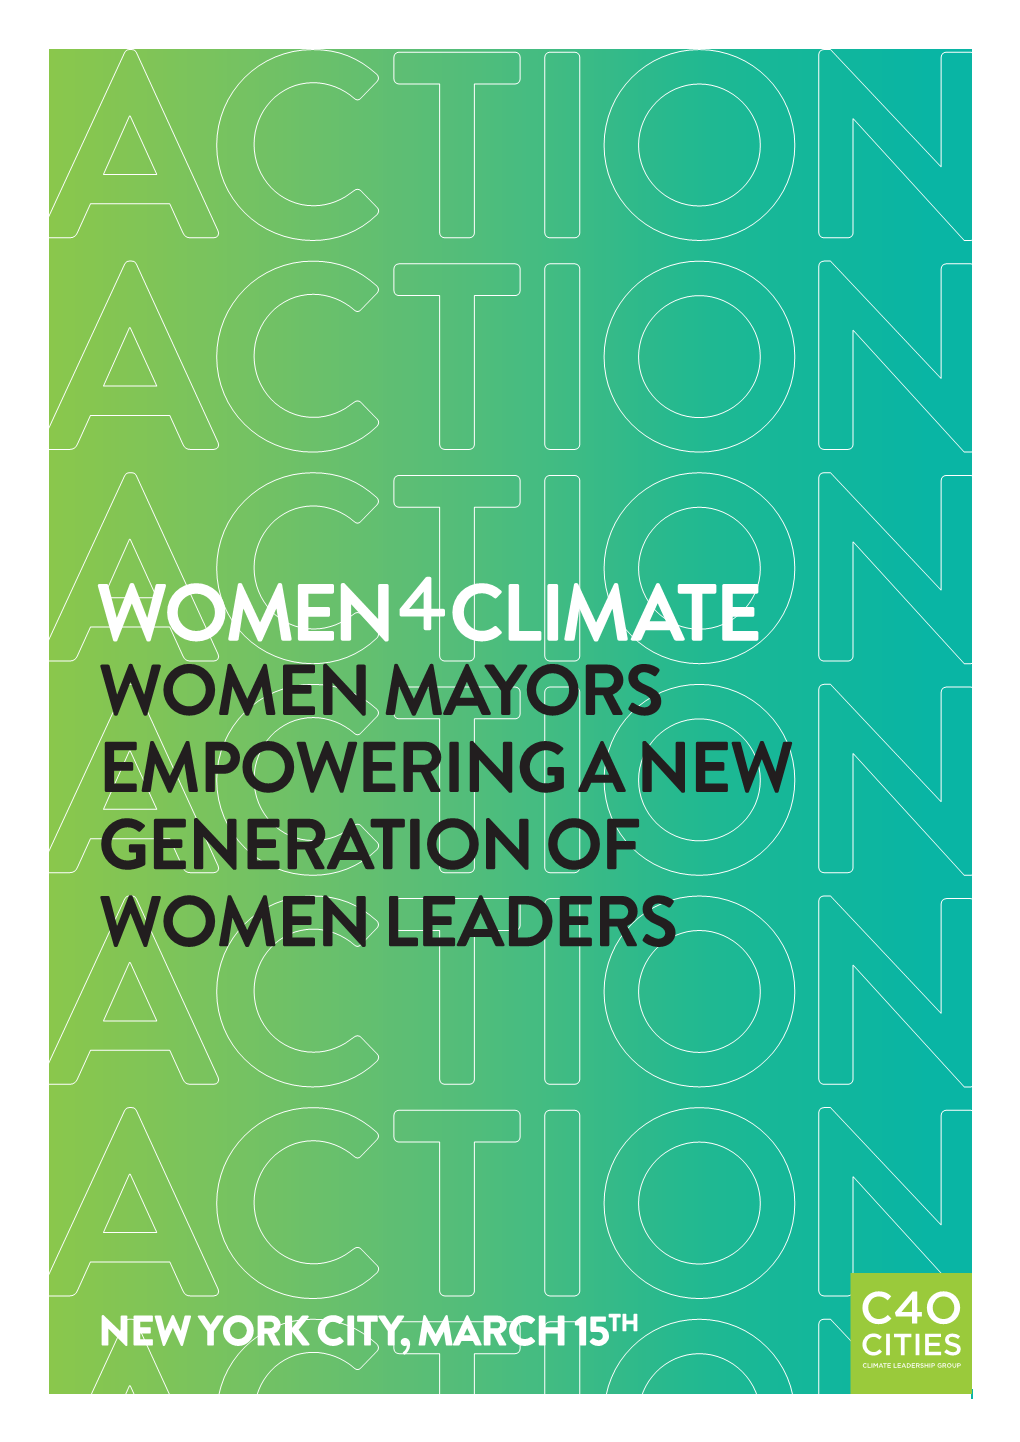 Women Mayors Empowering a New Generation of Women Leaders